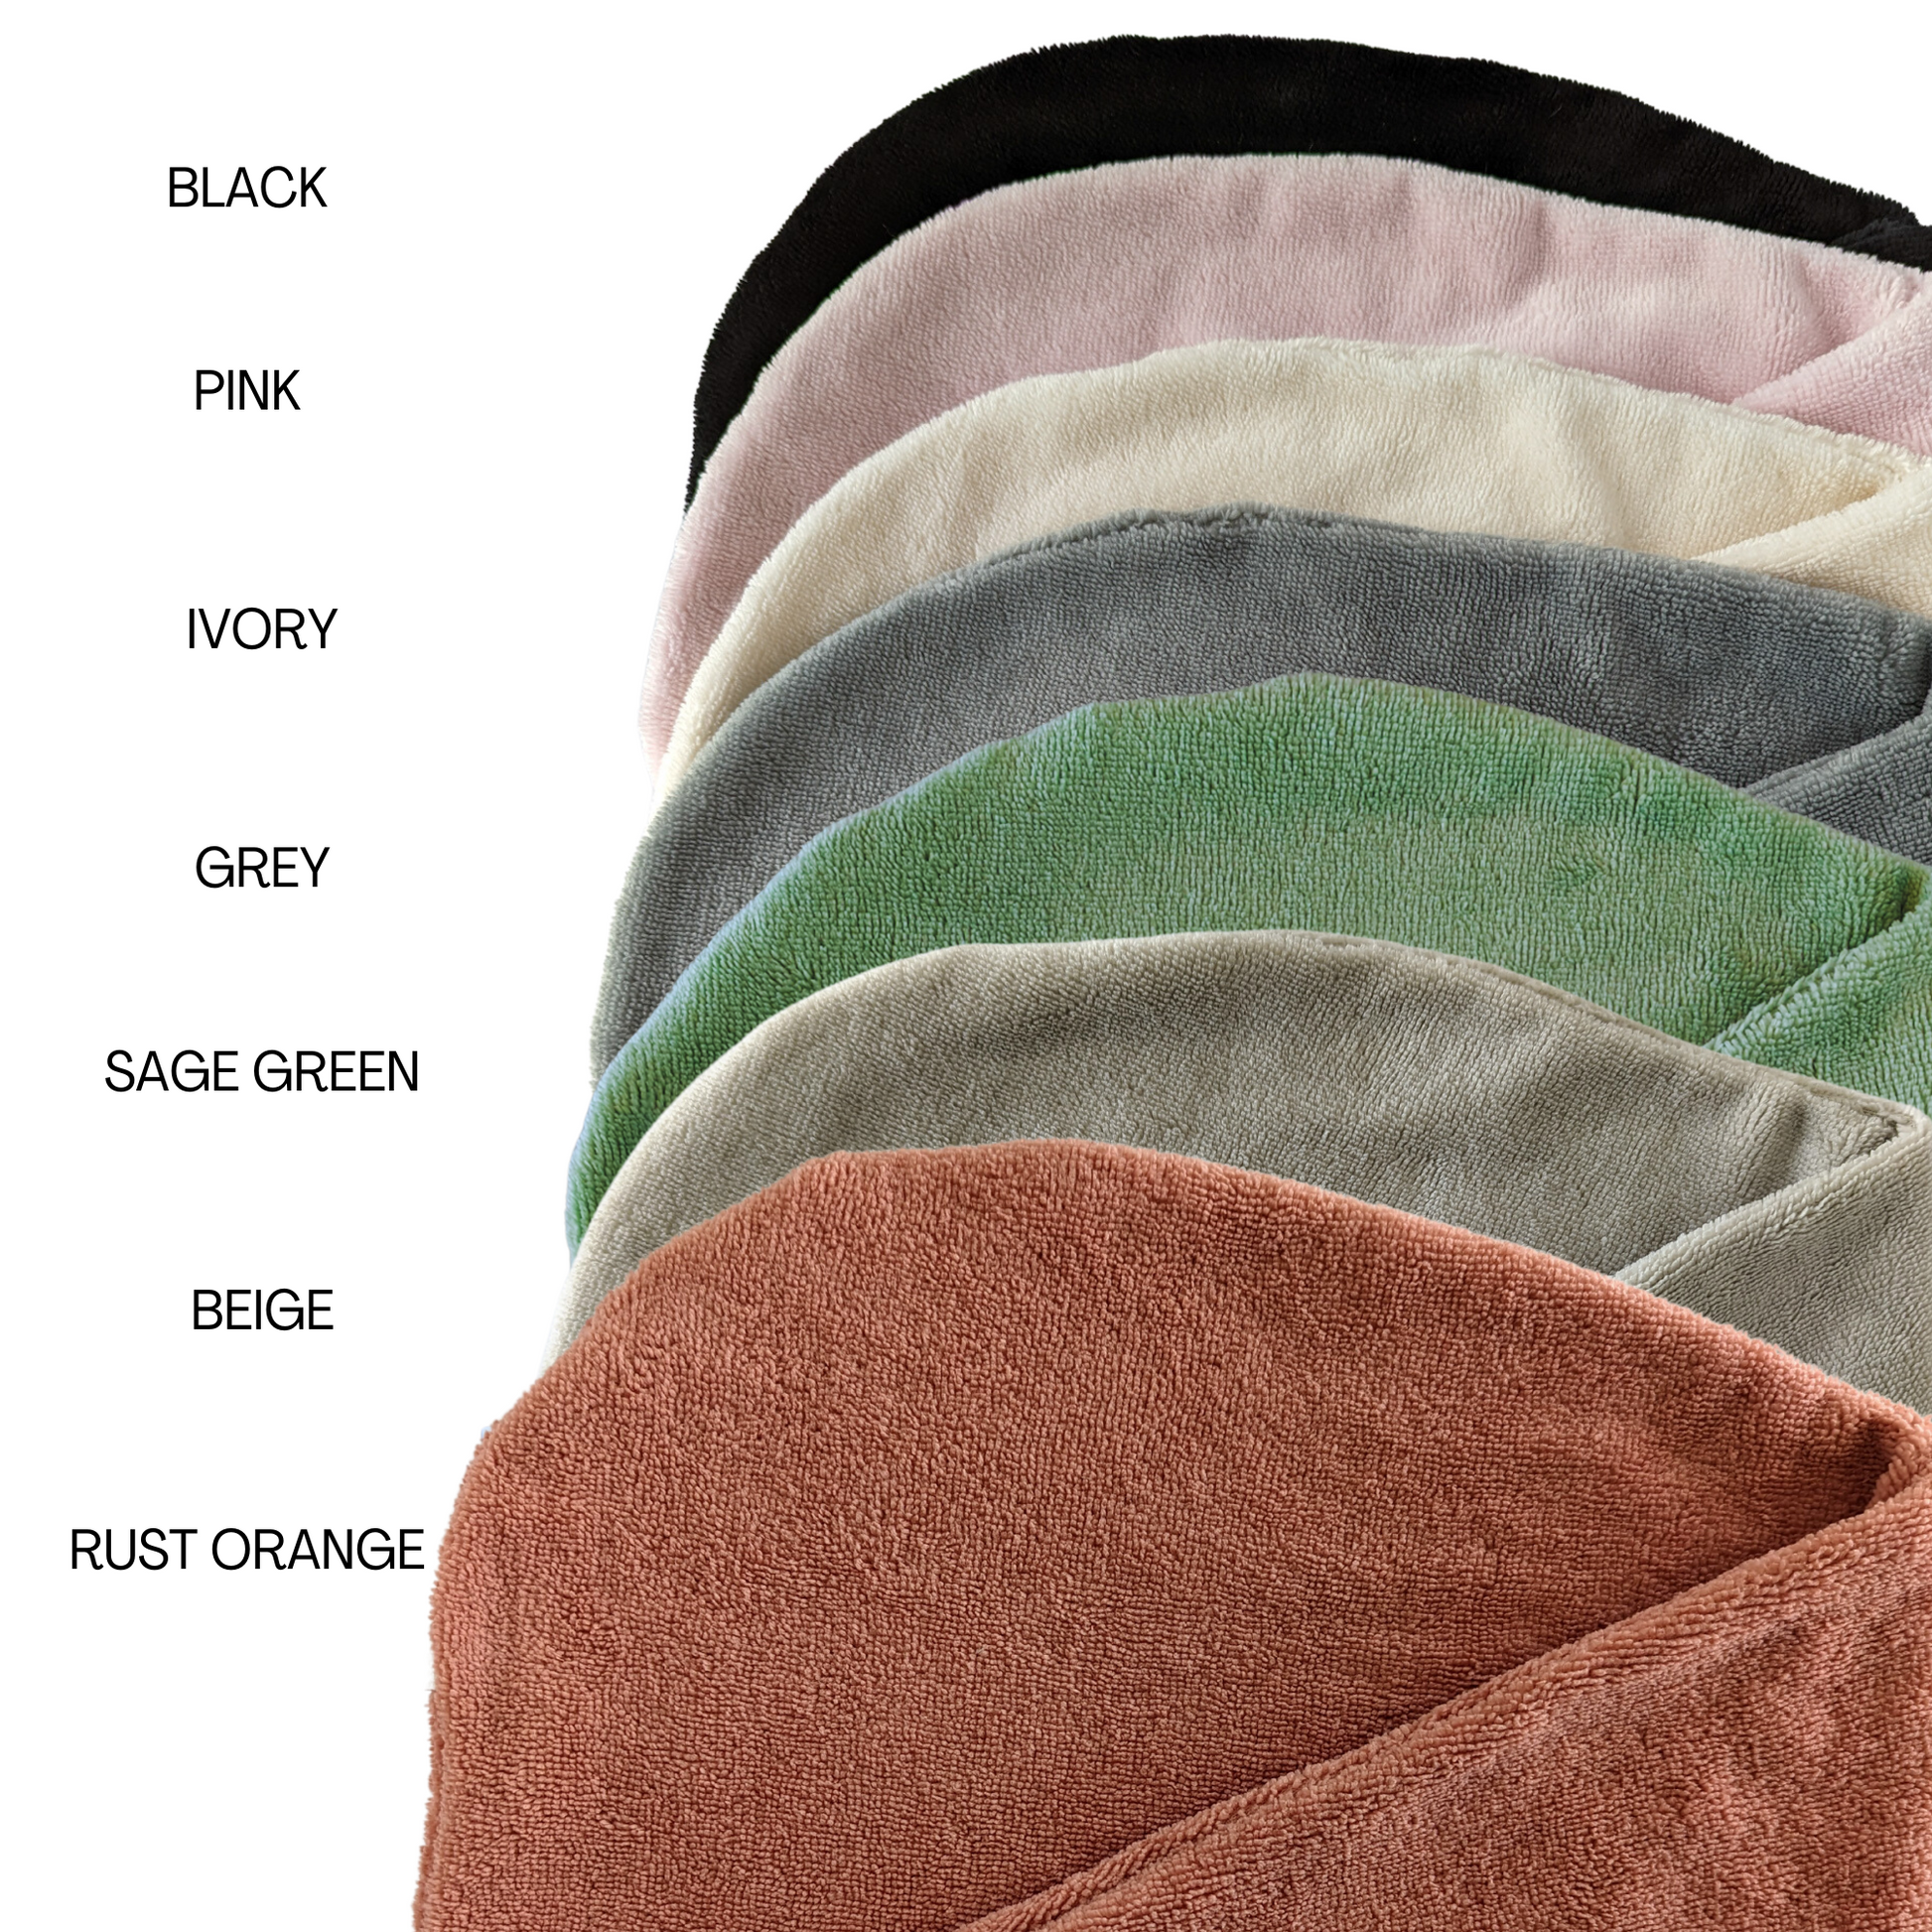 hair towels made in canada, available in 7 colours, ivory, black , pink, beige, sage green, grey, and rust orange